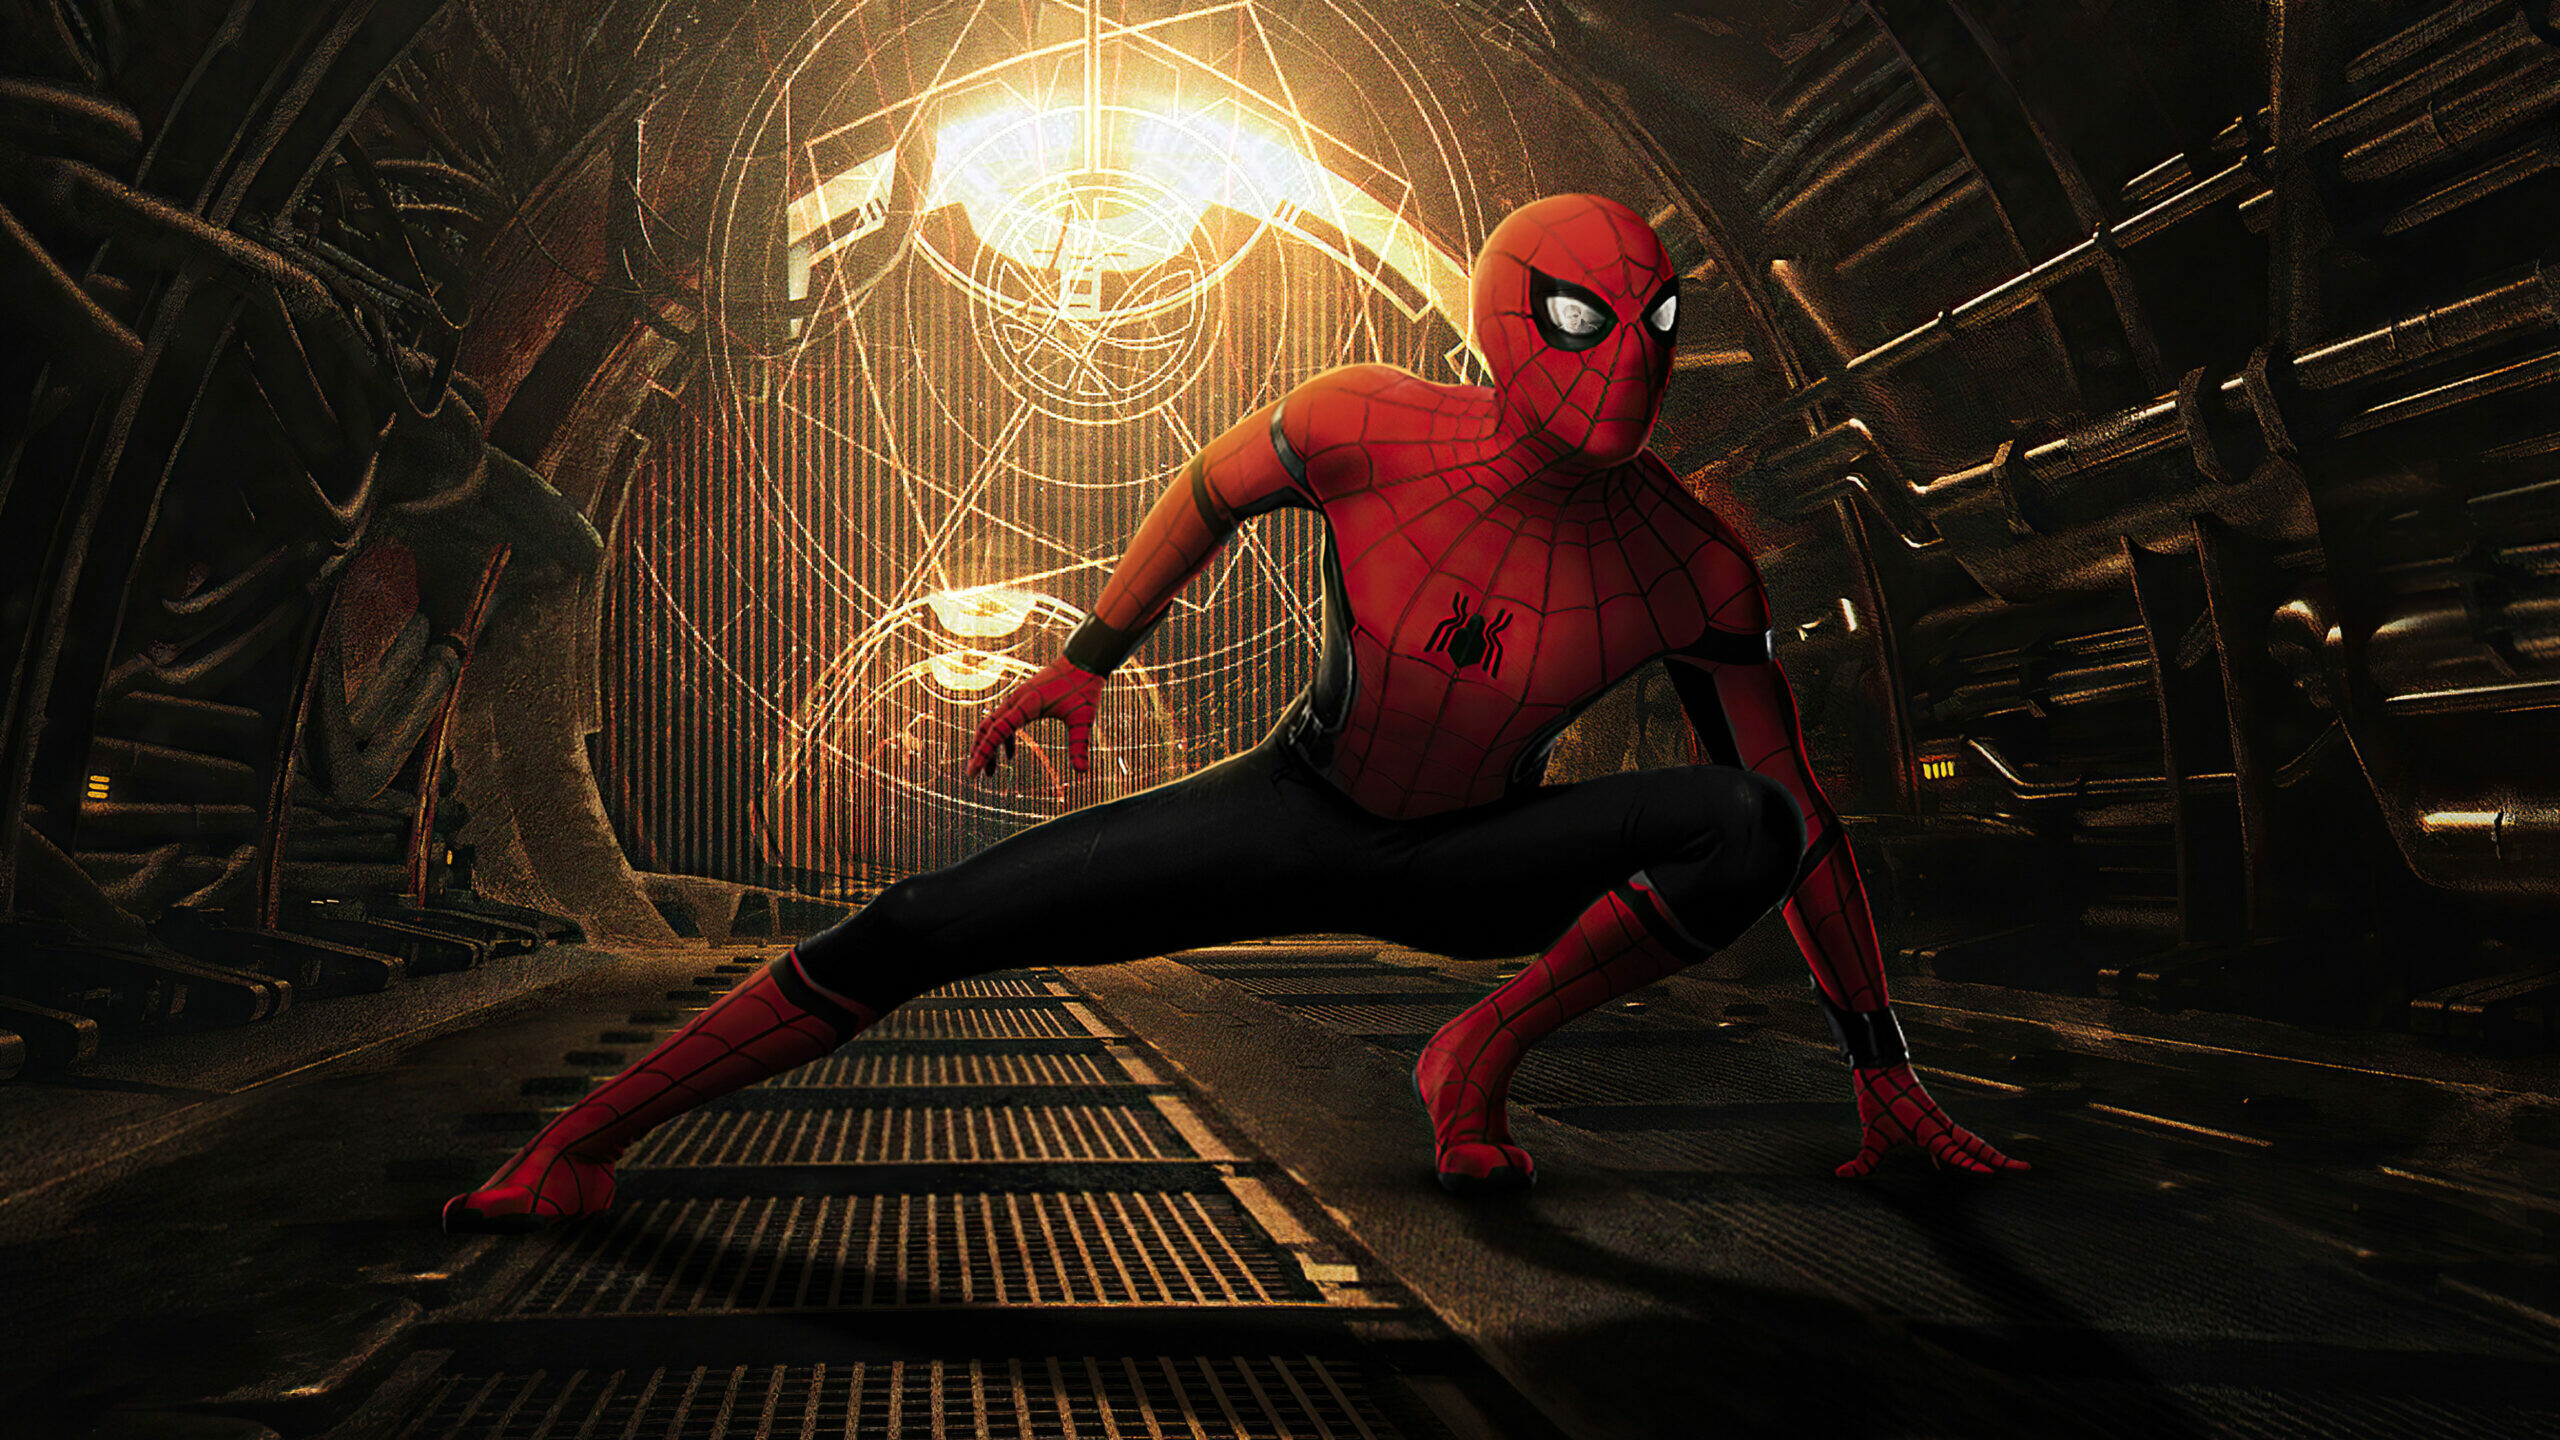 Spider-Man: No Way Home: The highest-grossing film released by Sony Pictures. 2560x1440 HD Wallpaper.